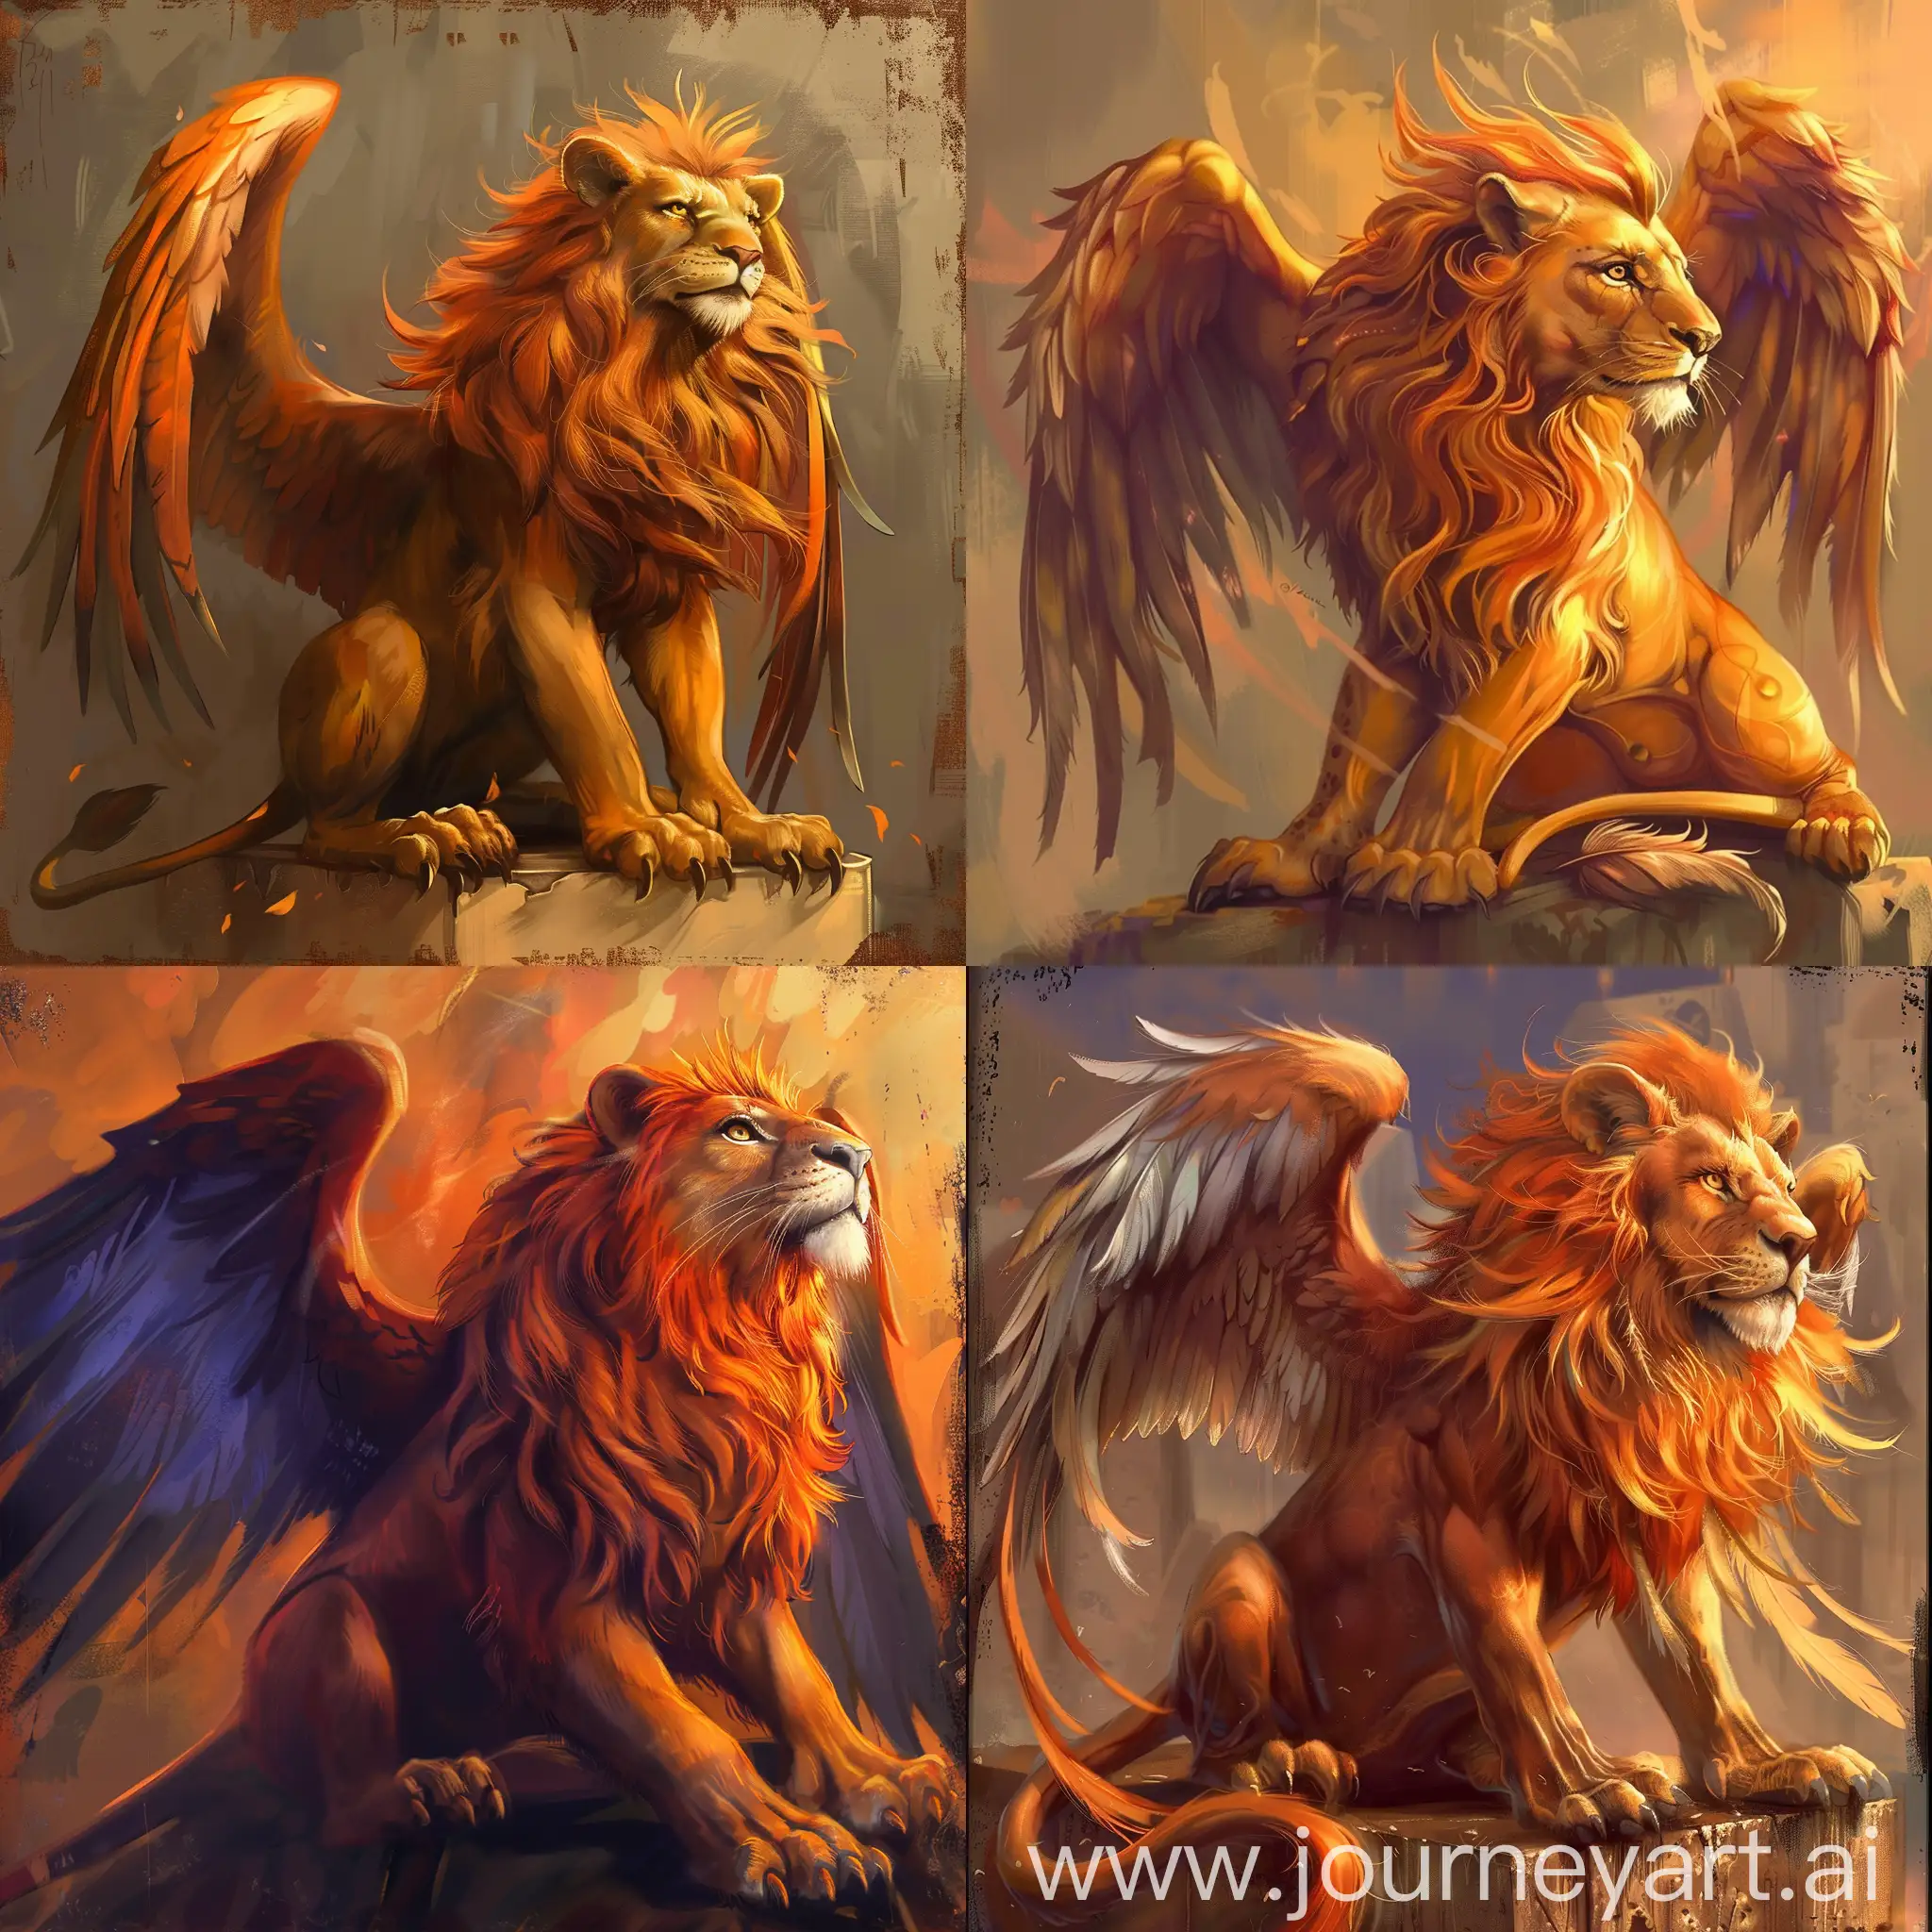 griffon, powerful lion with the head of an eagle, beautiful wings, orange color, dramatic